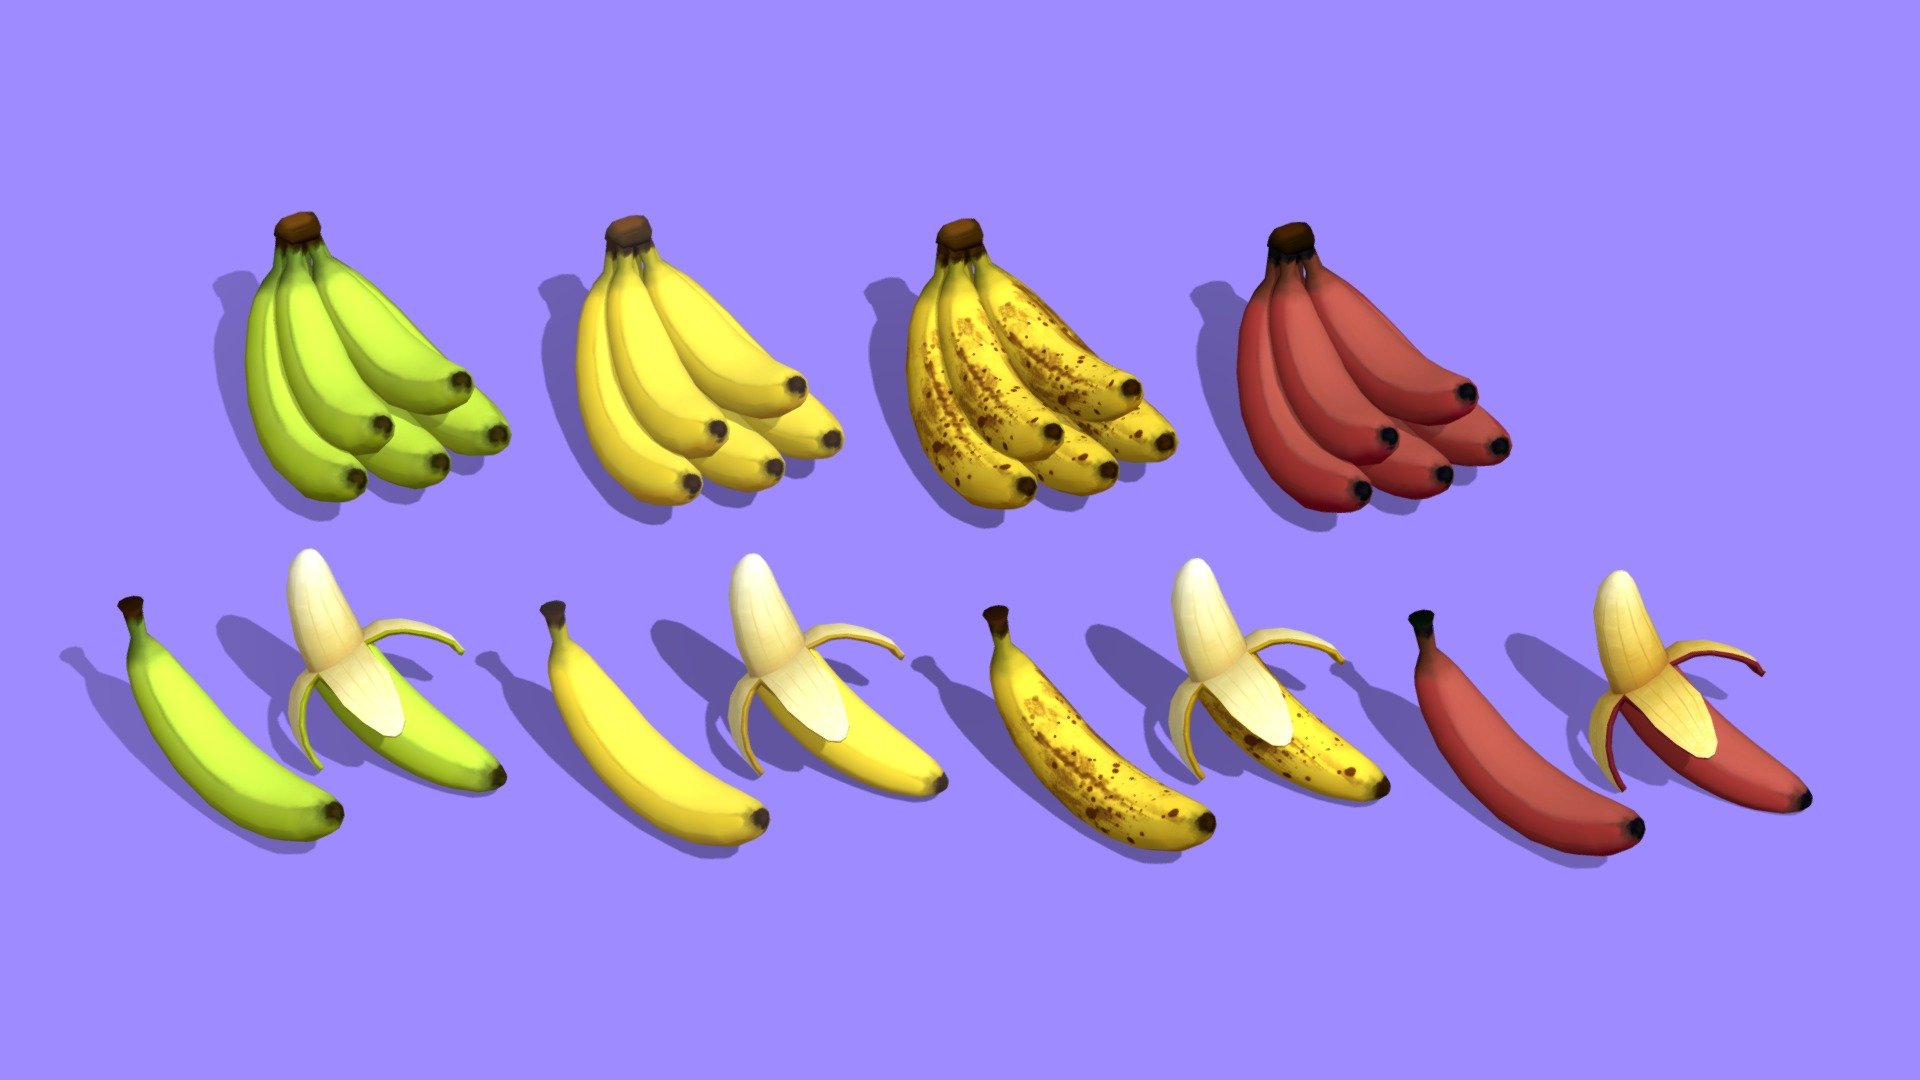 There's always money in the banana stand!




3 different models - unpeeled, peeled and bunched 

4 texture variations 

1024x1024 diffuse textures - can be lit or unlit

Lowpoly, perfect for mobile! Handpainted in Photoshop

Make sure to check out my other assets! Every asset is modeled and painted in the same style so your game or project will maintain a cohesive and unique style with a wide variety of assets to choose from! - Bananas - Buy Royalty Free 3D model by Megan Alcock (@citystreetlight) 3d model